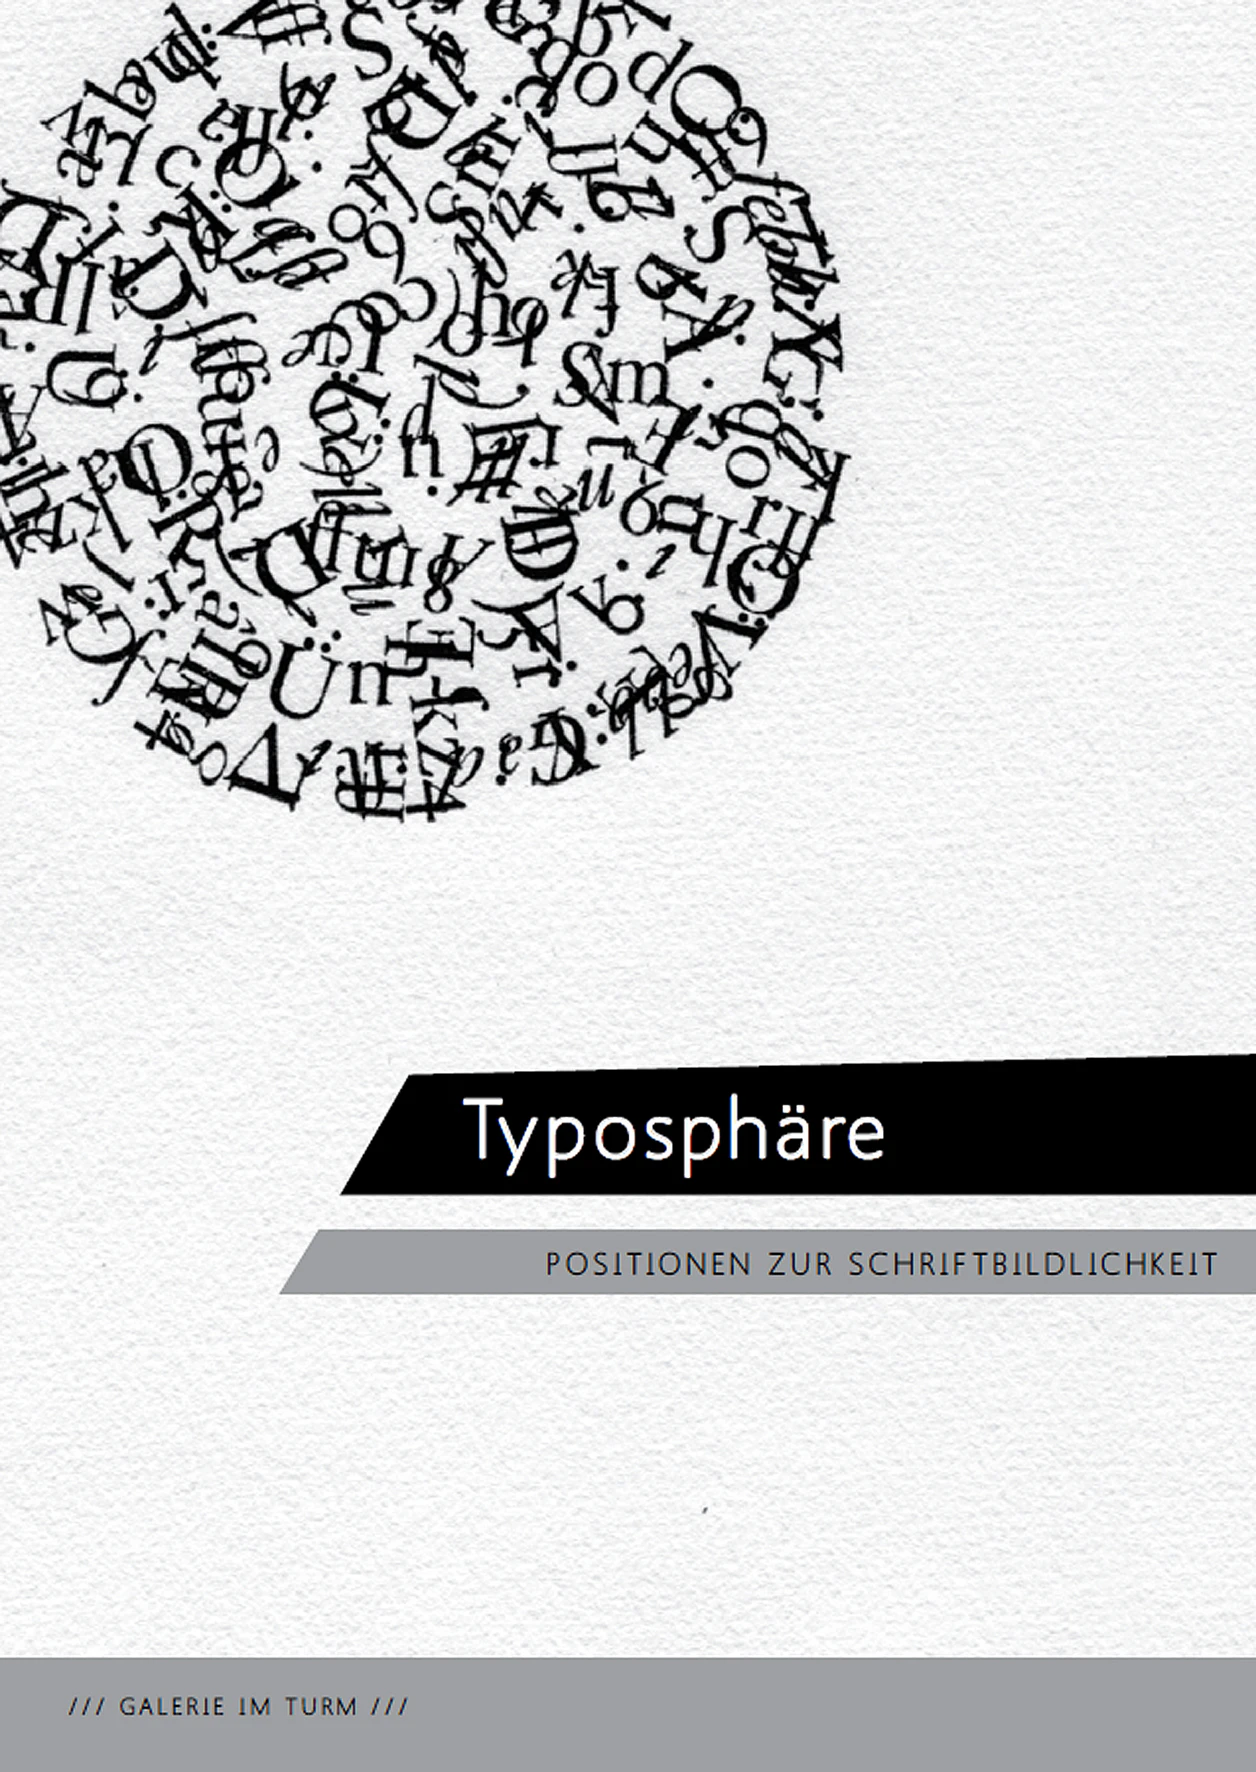 TYPOSPHÄRE - Current position of script-imagery